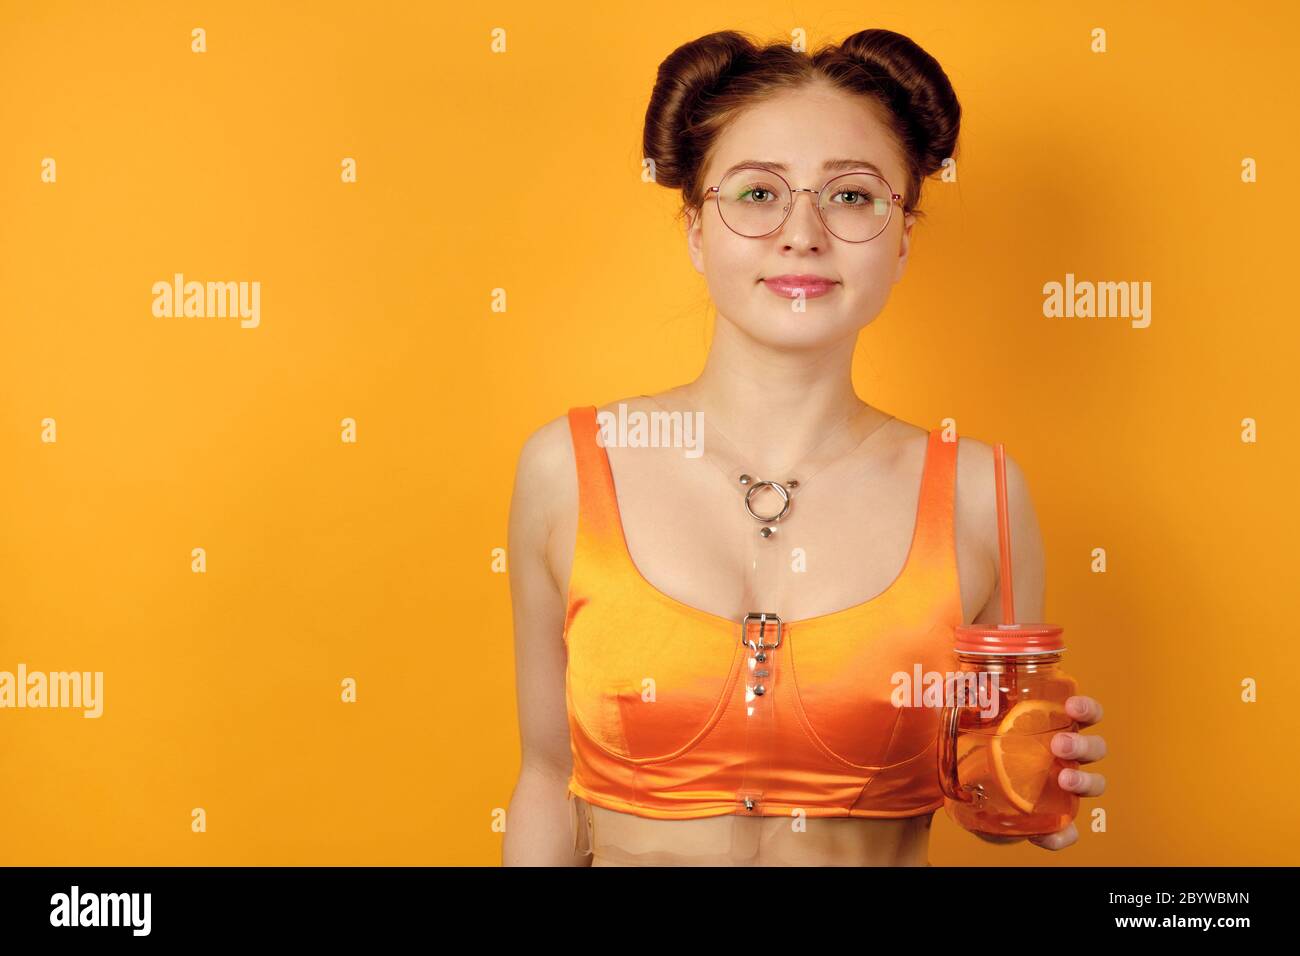 Redhead girl in round glasses and an orange top is standing on a yellow background with a glass of lemonade with a straw in hands Stock Photo